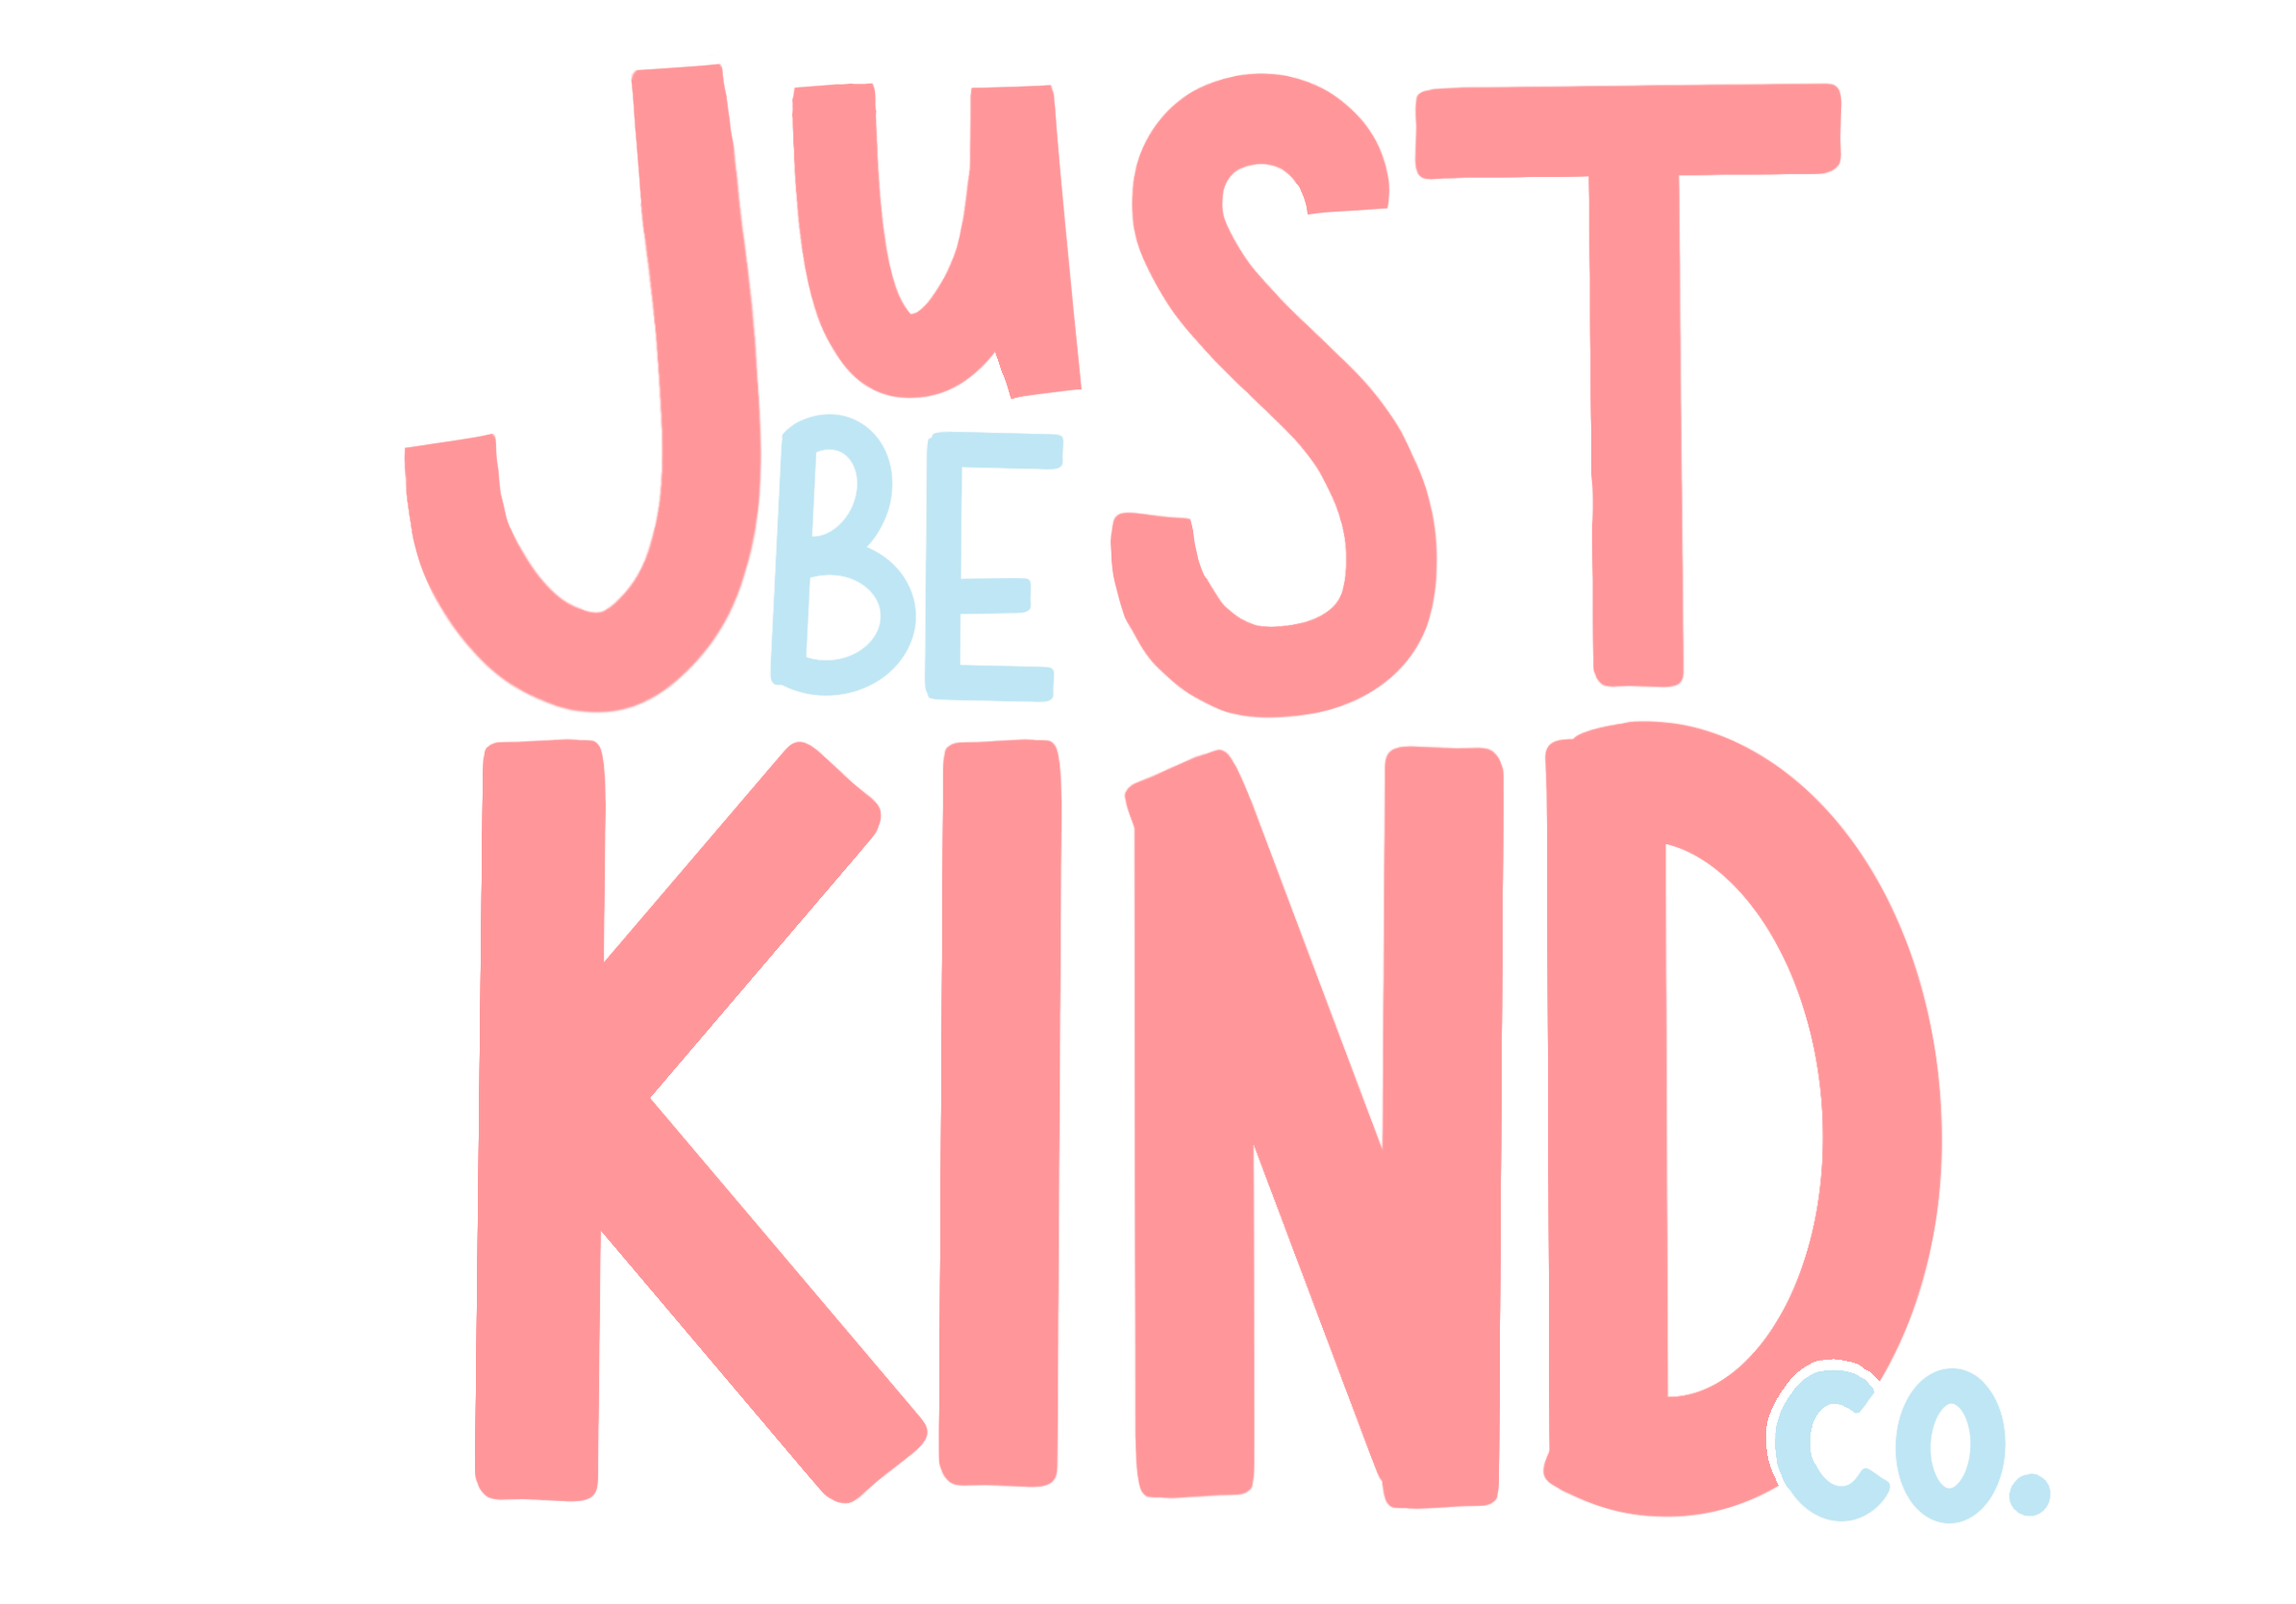 Just Be Kind Co.